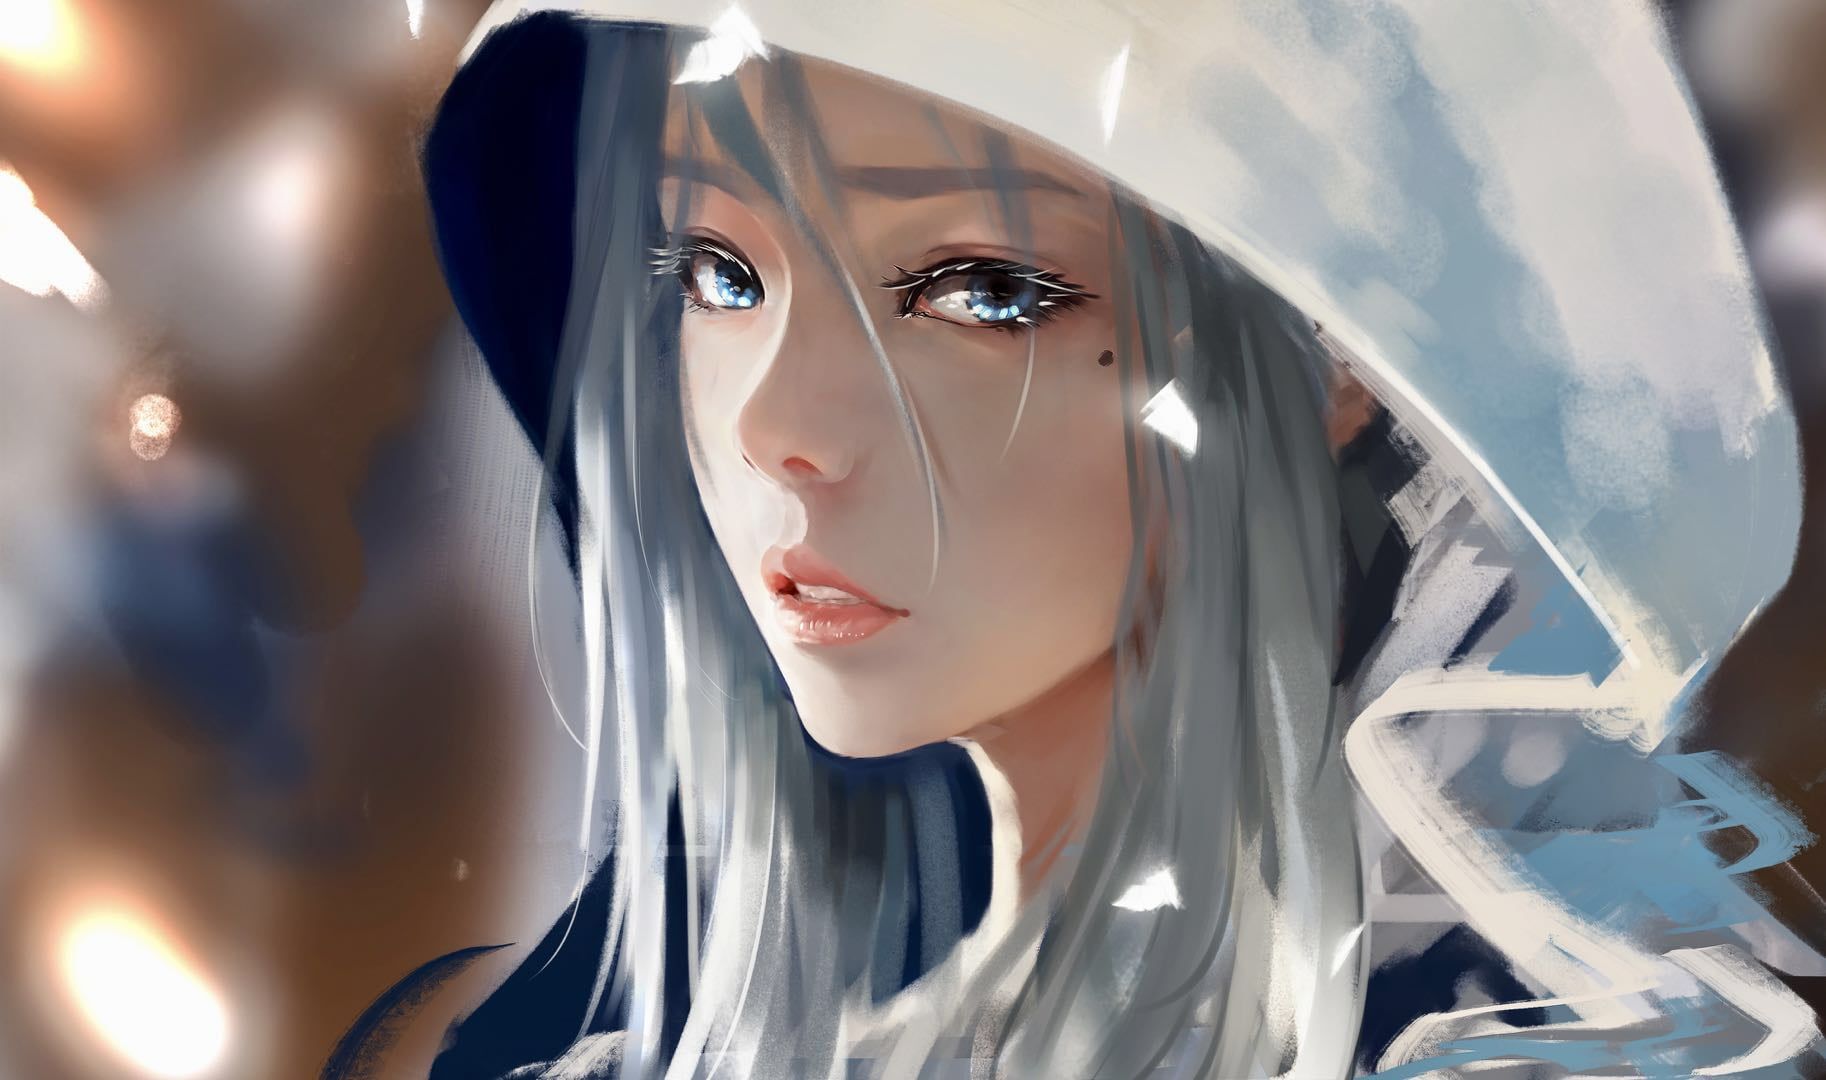 White Haired Female Anime Character With Hood, WLOP, Digital Art